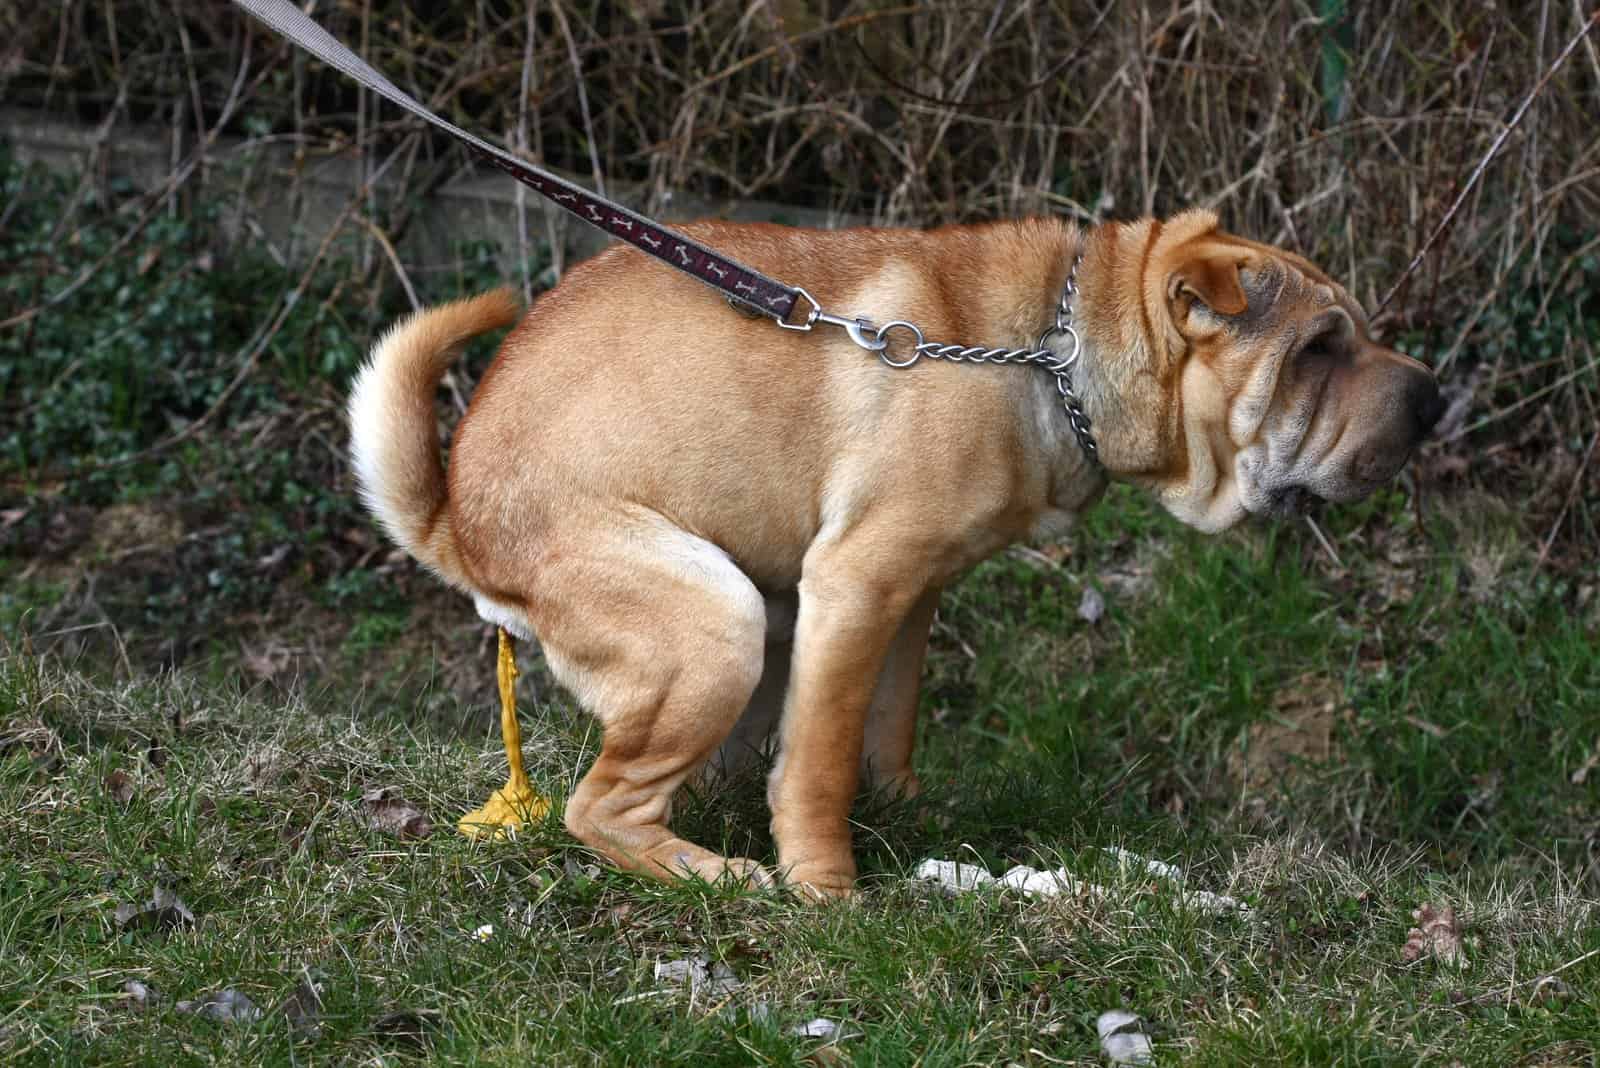 Yellow Dog Poop: 7 Possible Reasons, And How To Help